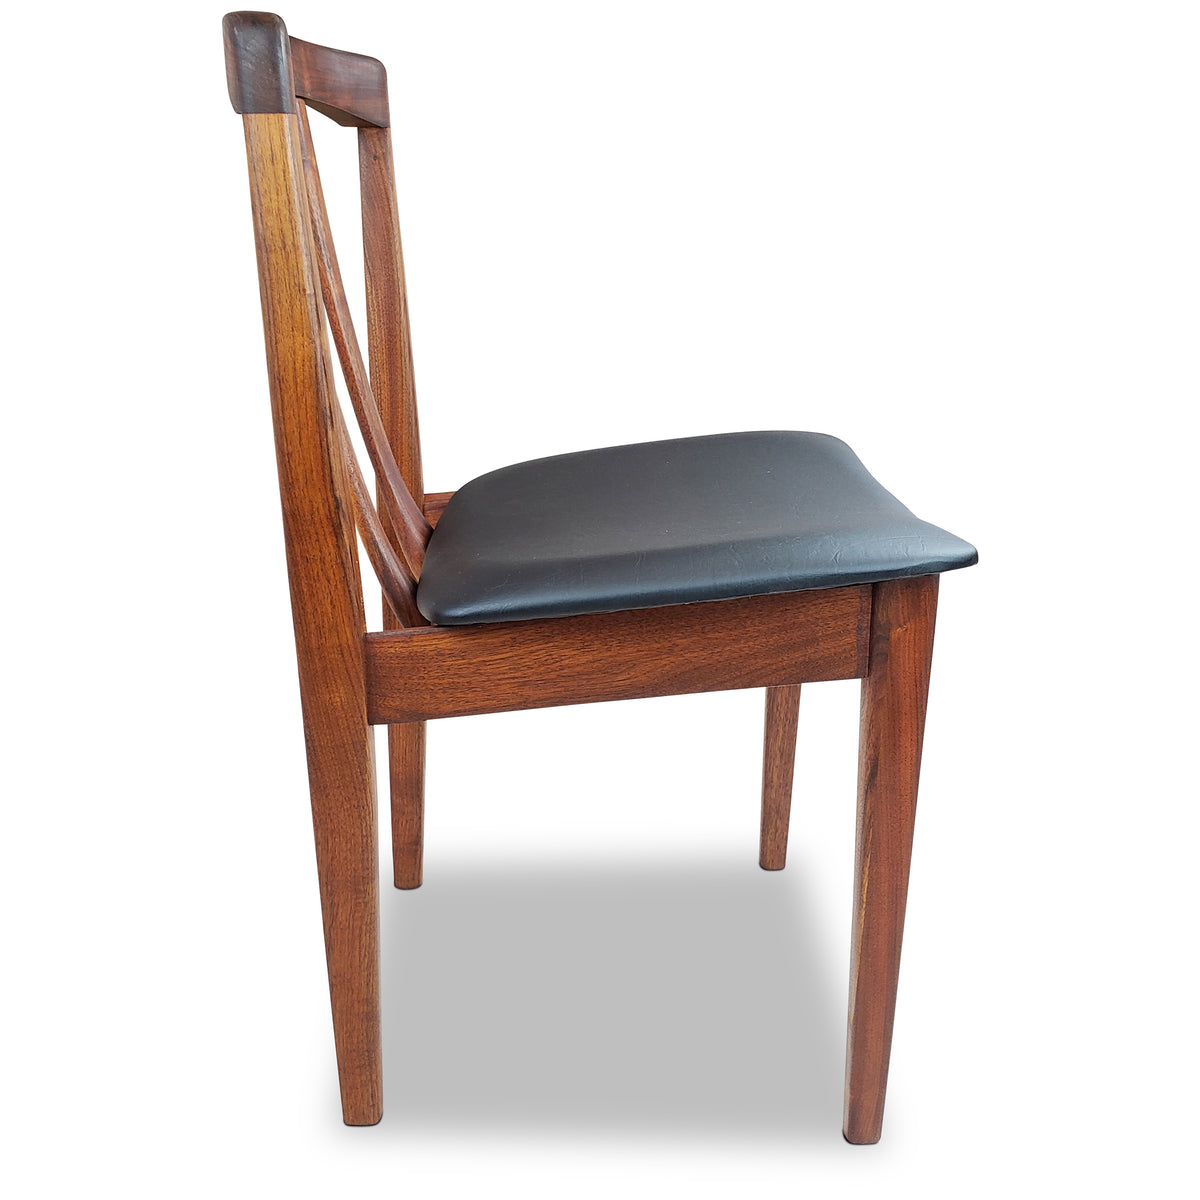 Vintage Walnut Dining Chairs by Honderich Furniture Co.